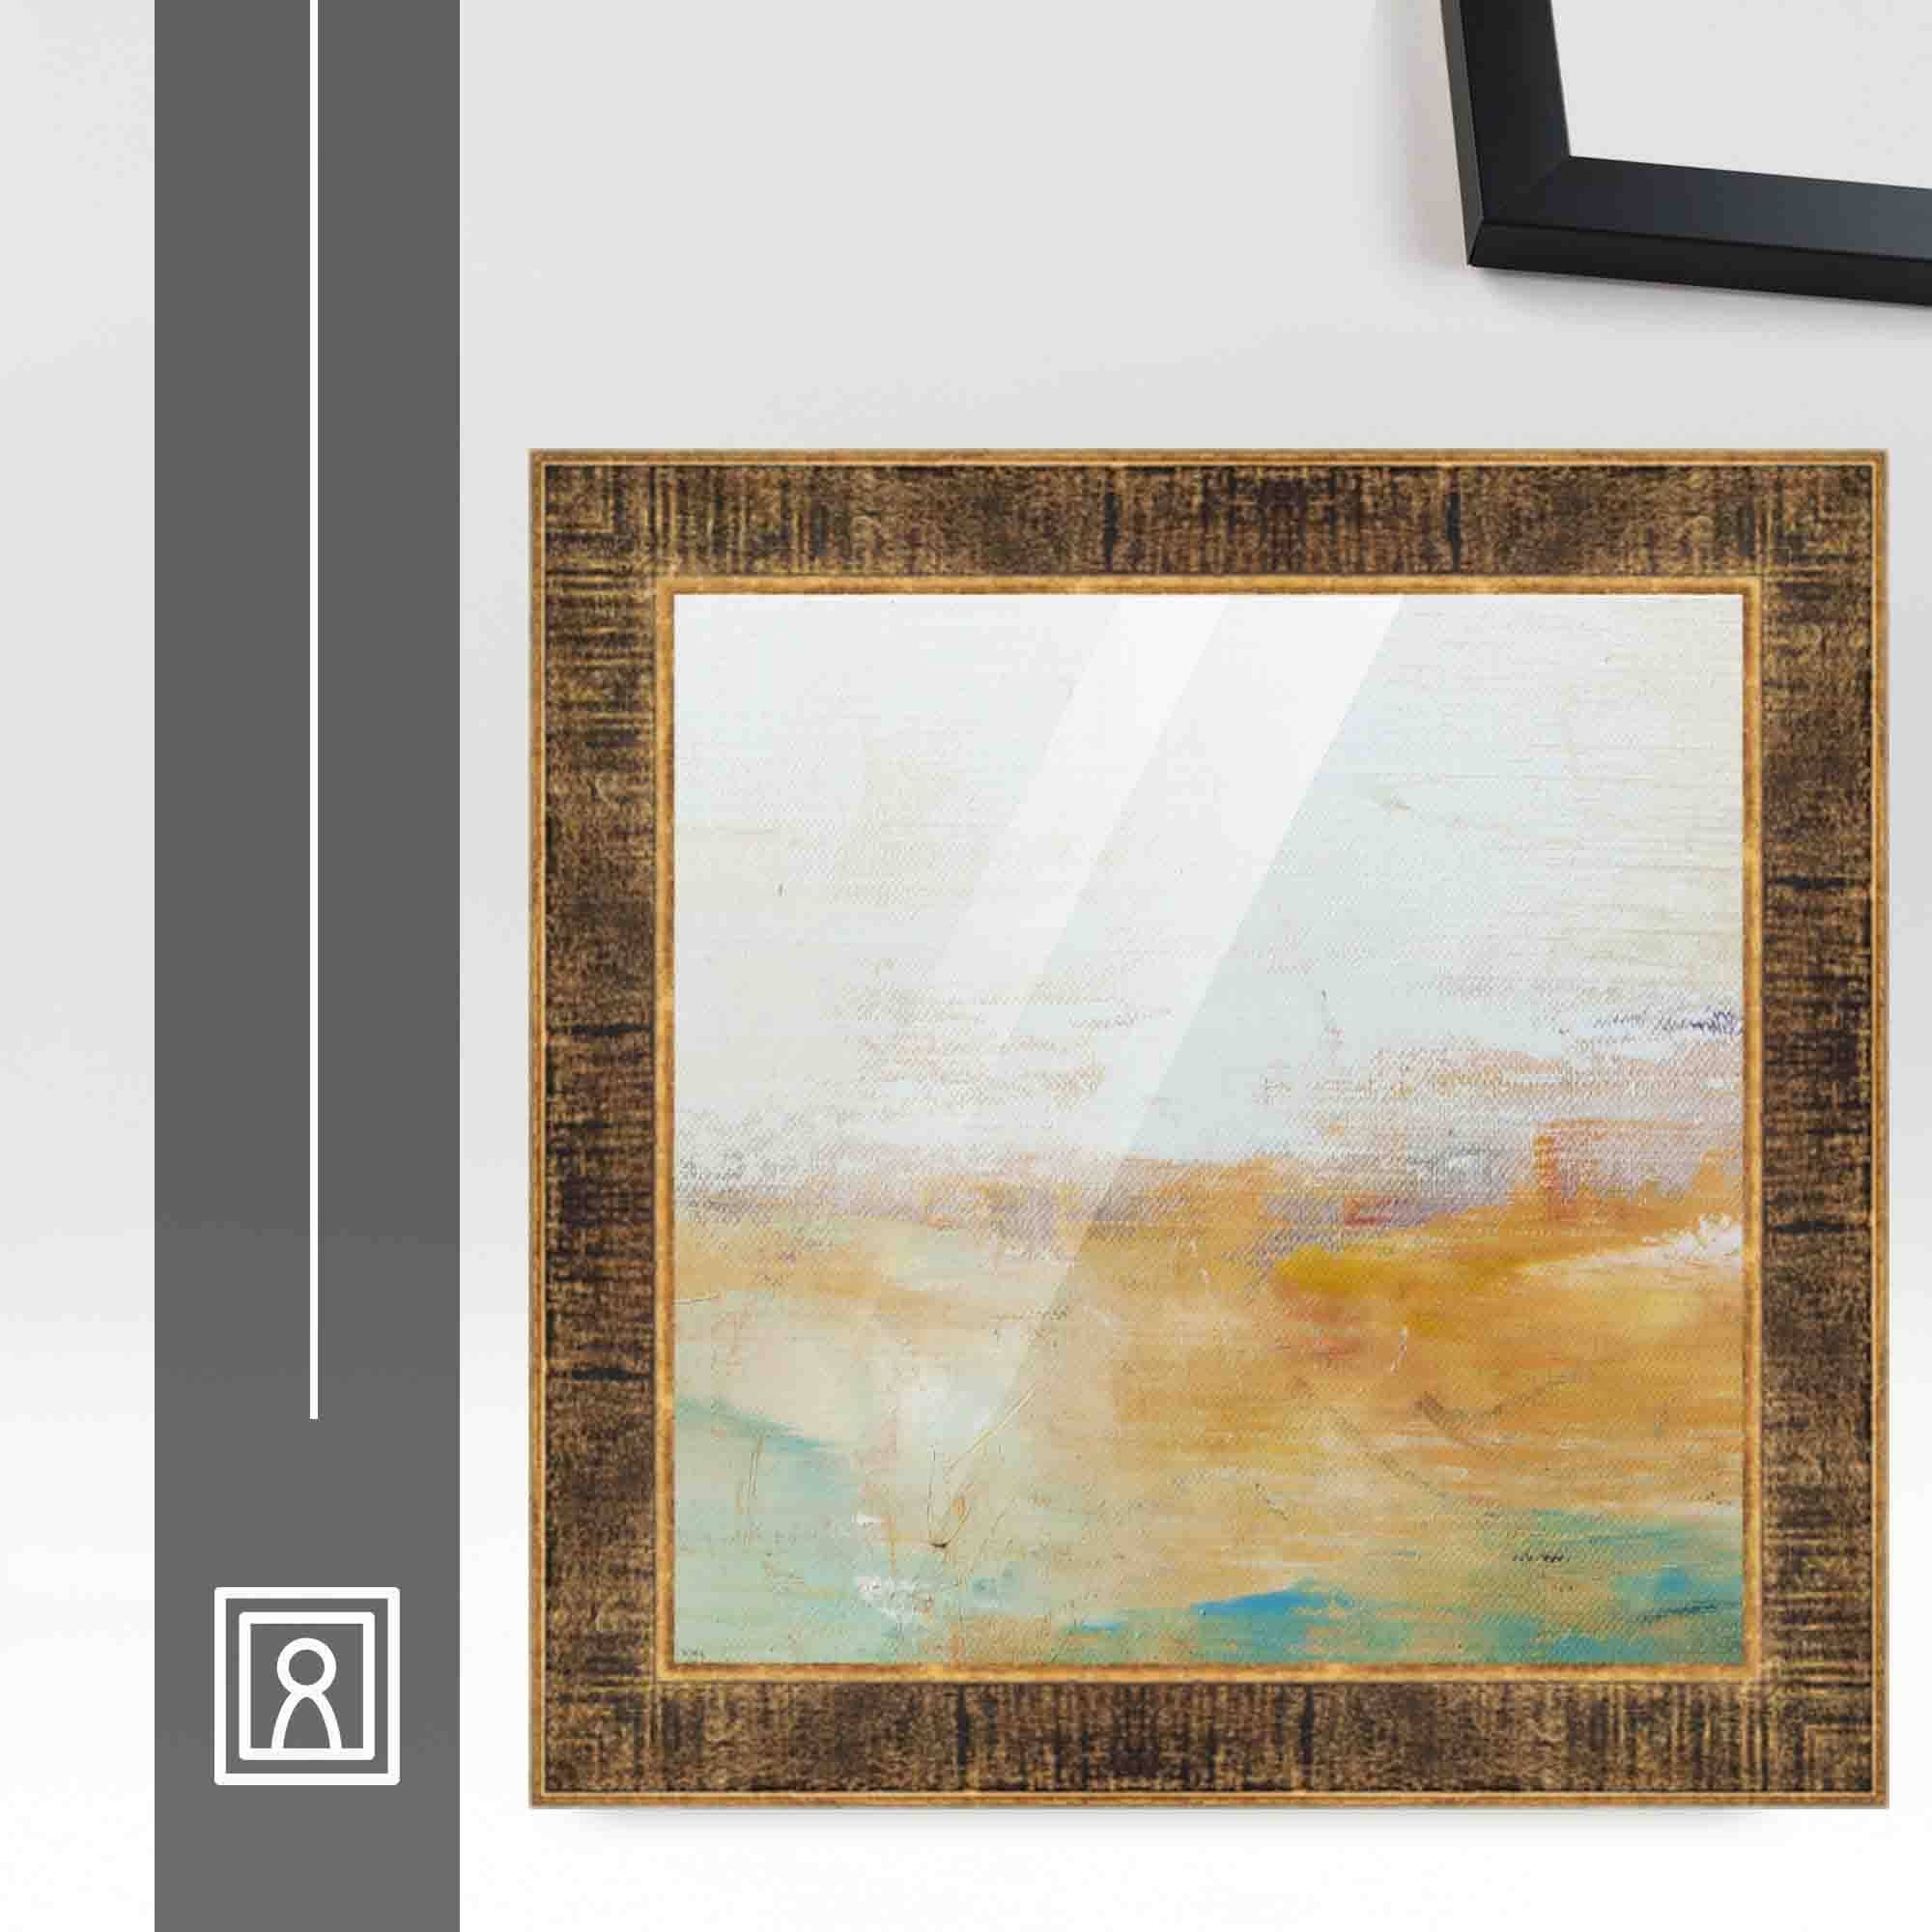 CustomPictureFrames.com 12x12 Frame Black Real Wood Picture Frame Width 1.5 Inches | Interior Frame Depth 0.5 Inches | Sonoma Gold Distressed Photo